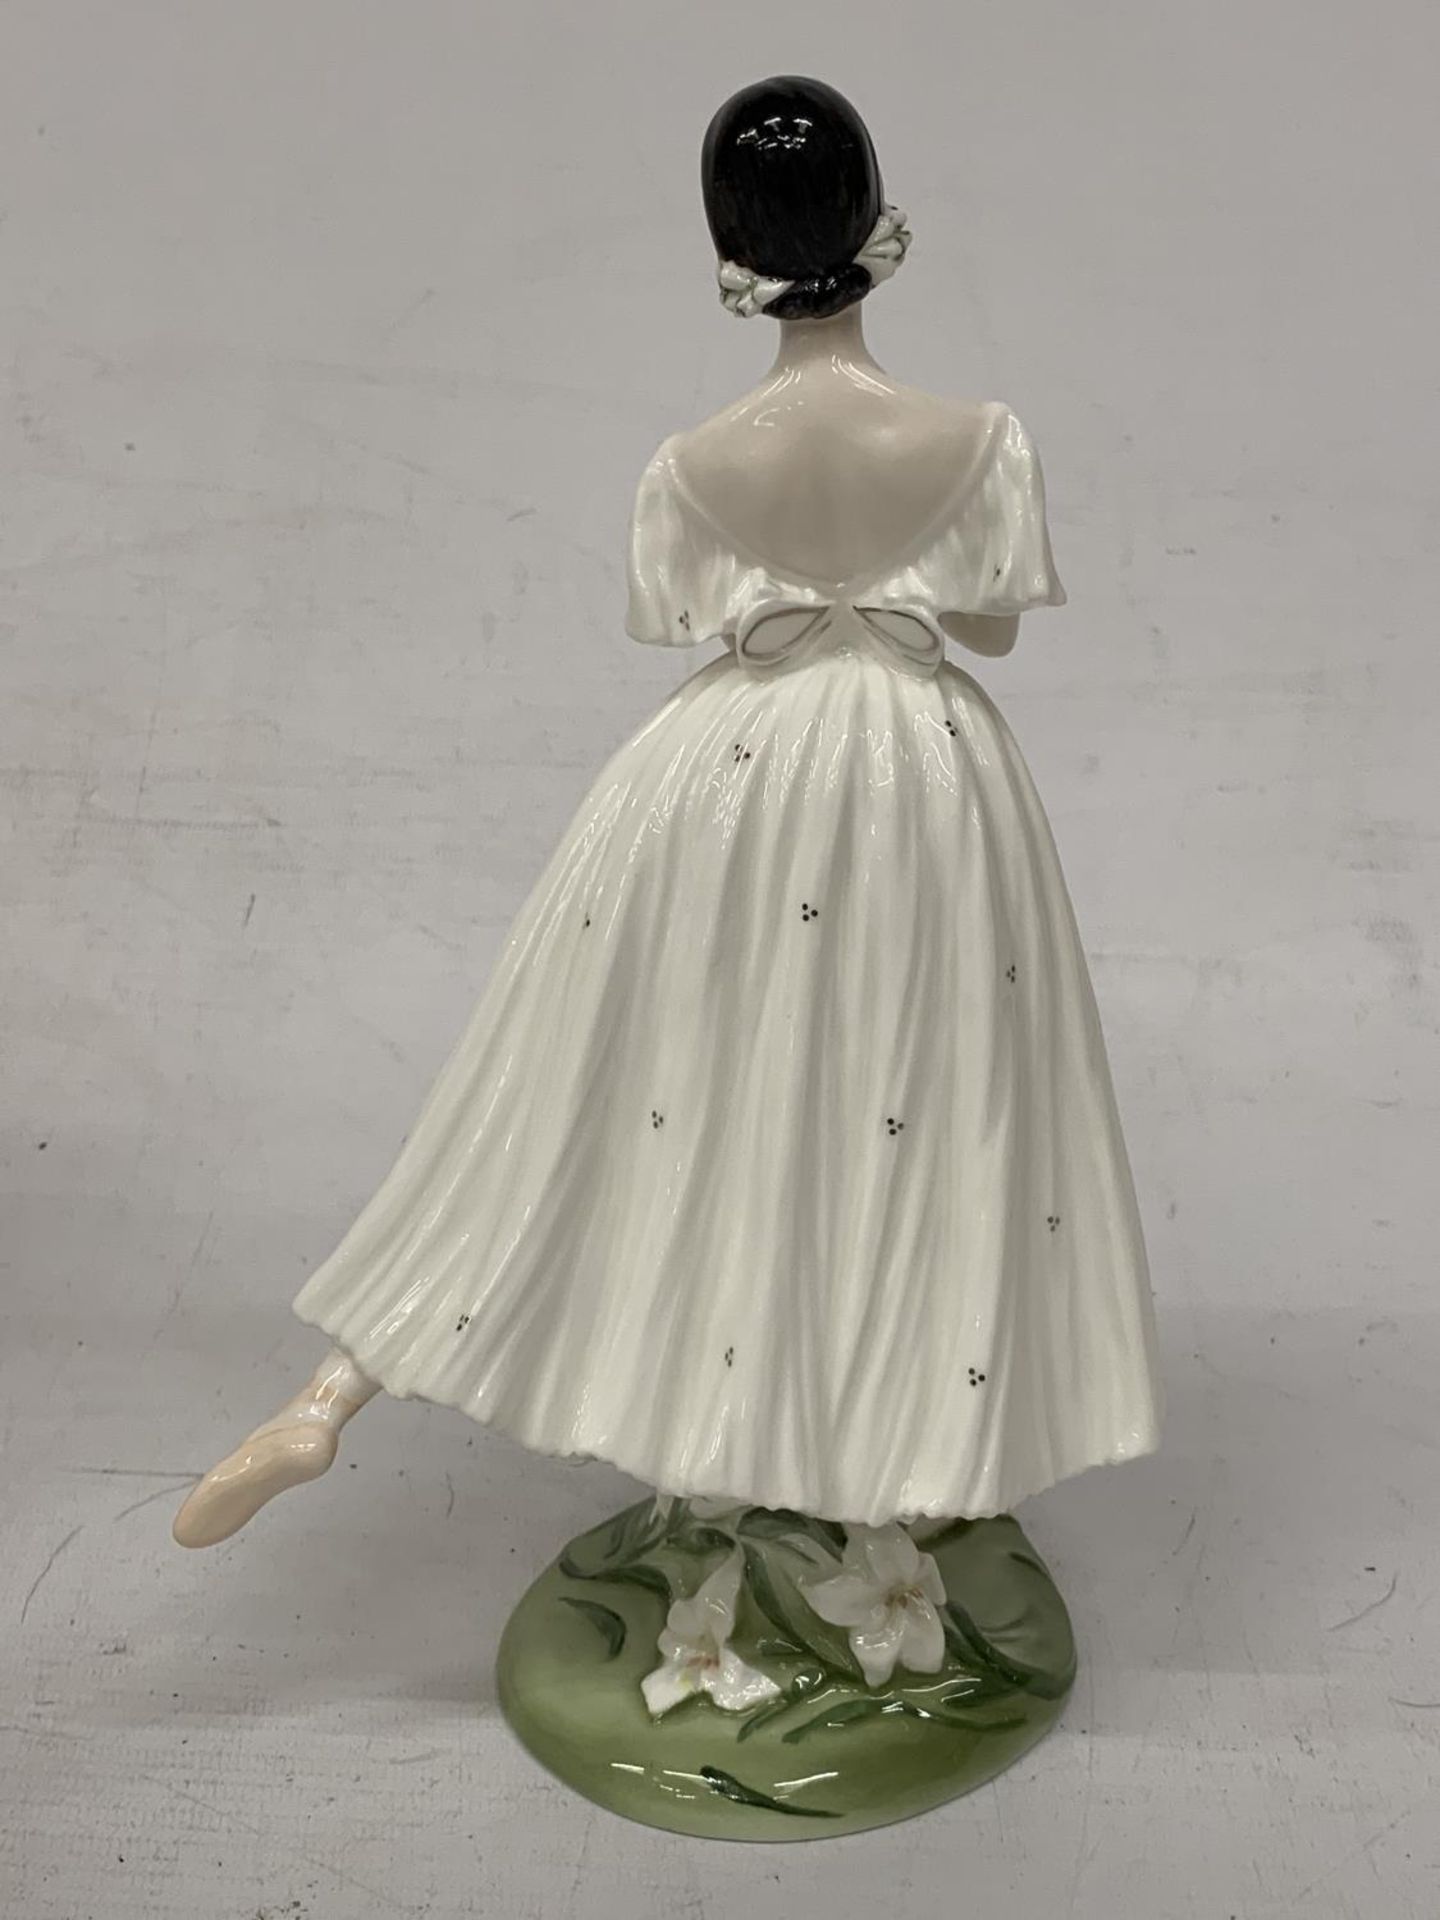 A COALPORT FIGURINE "DAME ALICE MARKOVA" IN THE ROYAL ACADEMY OF DANCING COLLECTION LIMITED - Image 3 of 5